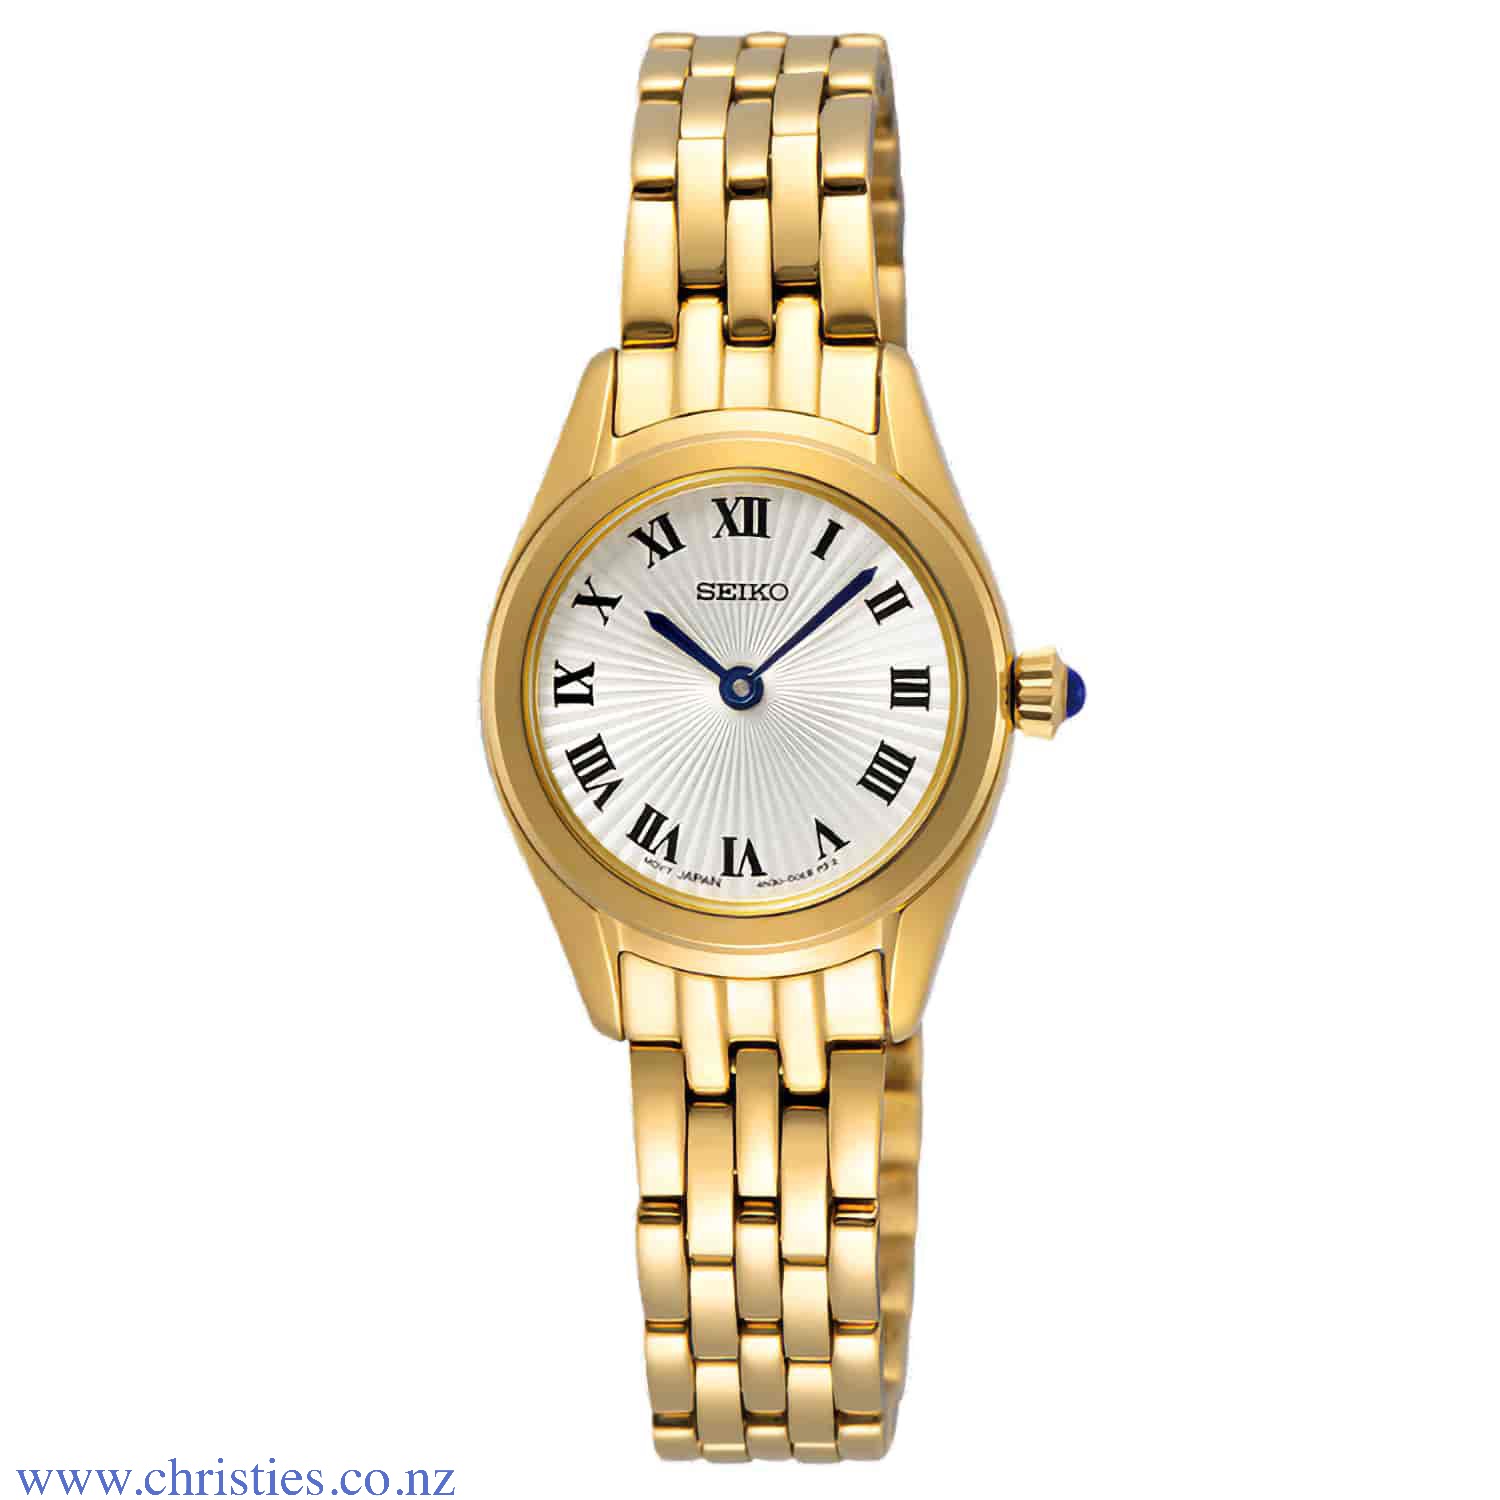 SWR040P Seiko  Ladies Yellow Gold Watch. Seiko SWR040P  Ladies Yellow Gold dress Watch LAYBUY - Pay it easy, in 6 weekly payments and have it now. Only pay the price of your purchase, when you pay your instalments on time. A late fee may be app seiko pros